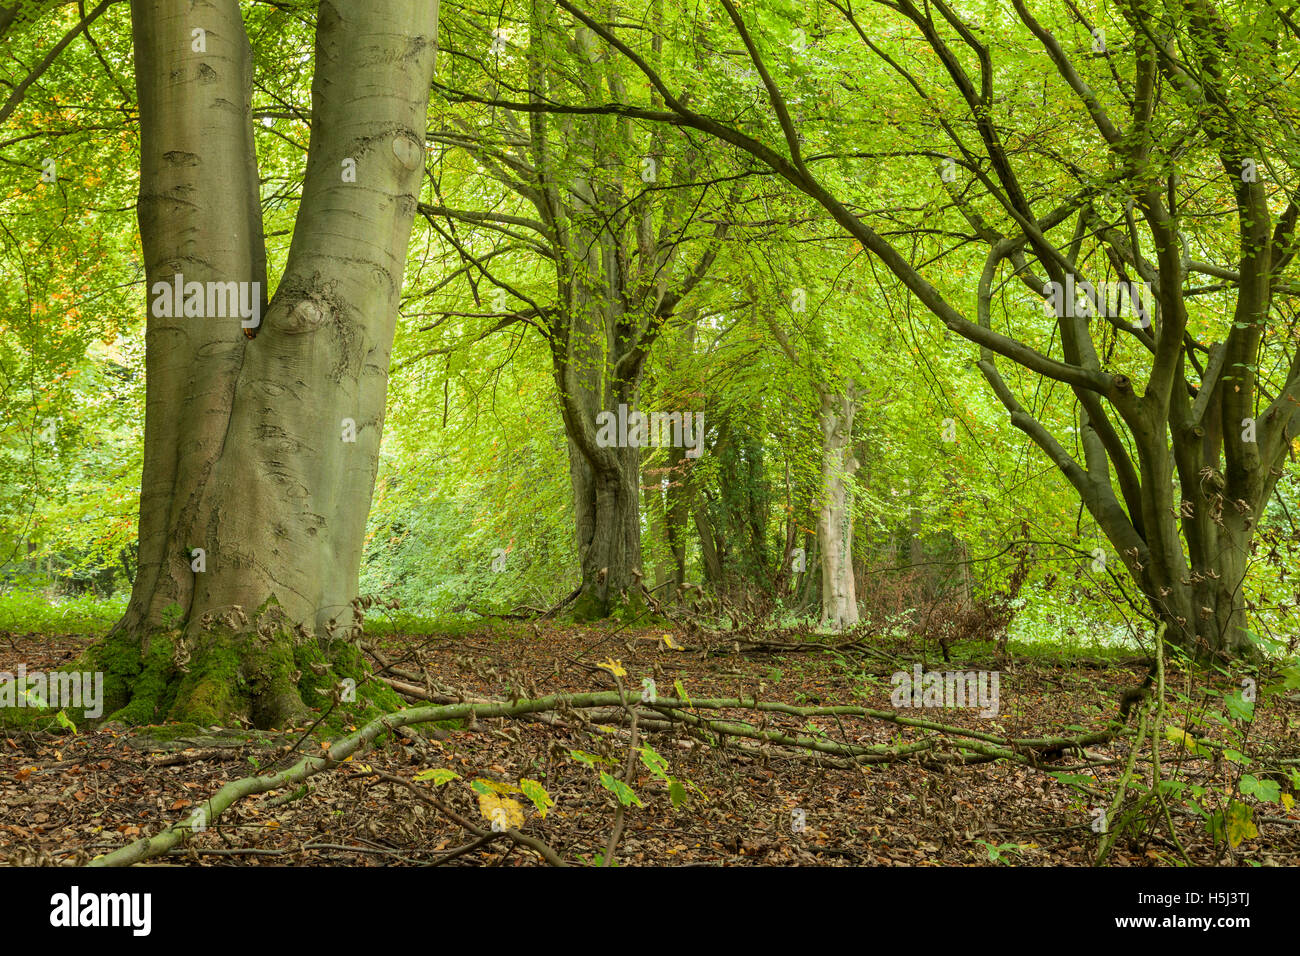 Ancient beech trees at Sheepleas Nature Reserve, North Downs, Surrey, England. Stock Photo